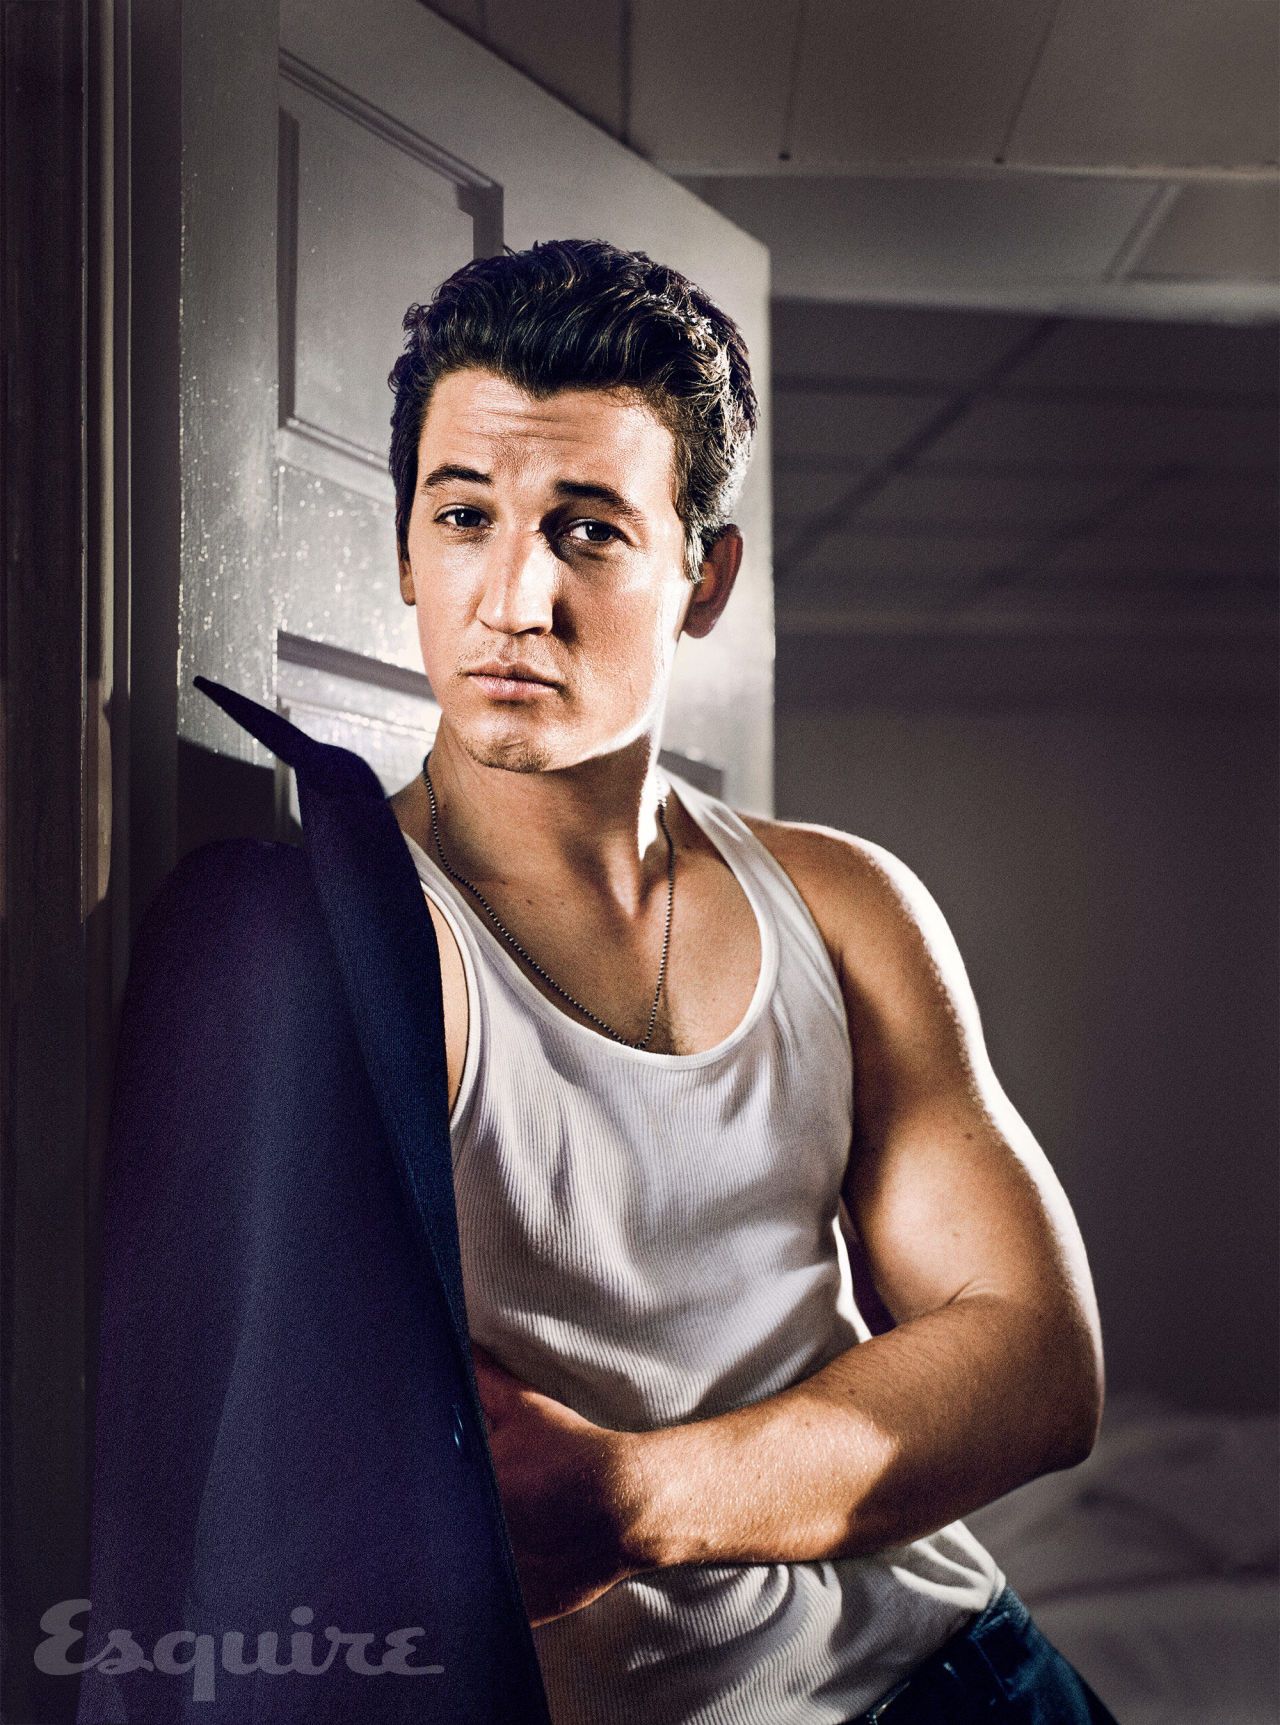 Miles Teller Is Young, Talented, and Doesn't Give a Rat's Ass What You Think